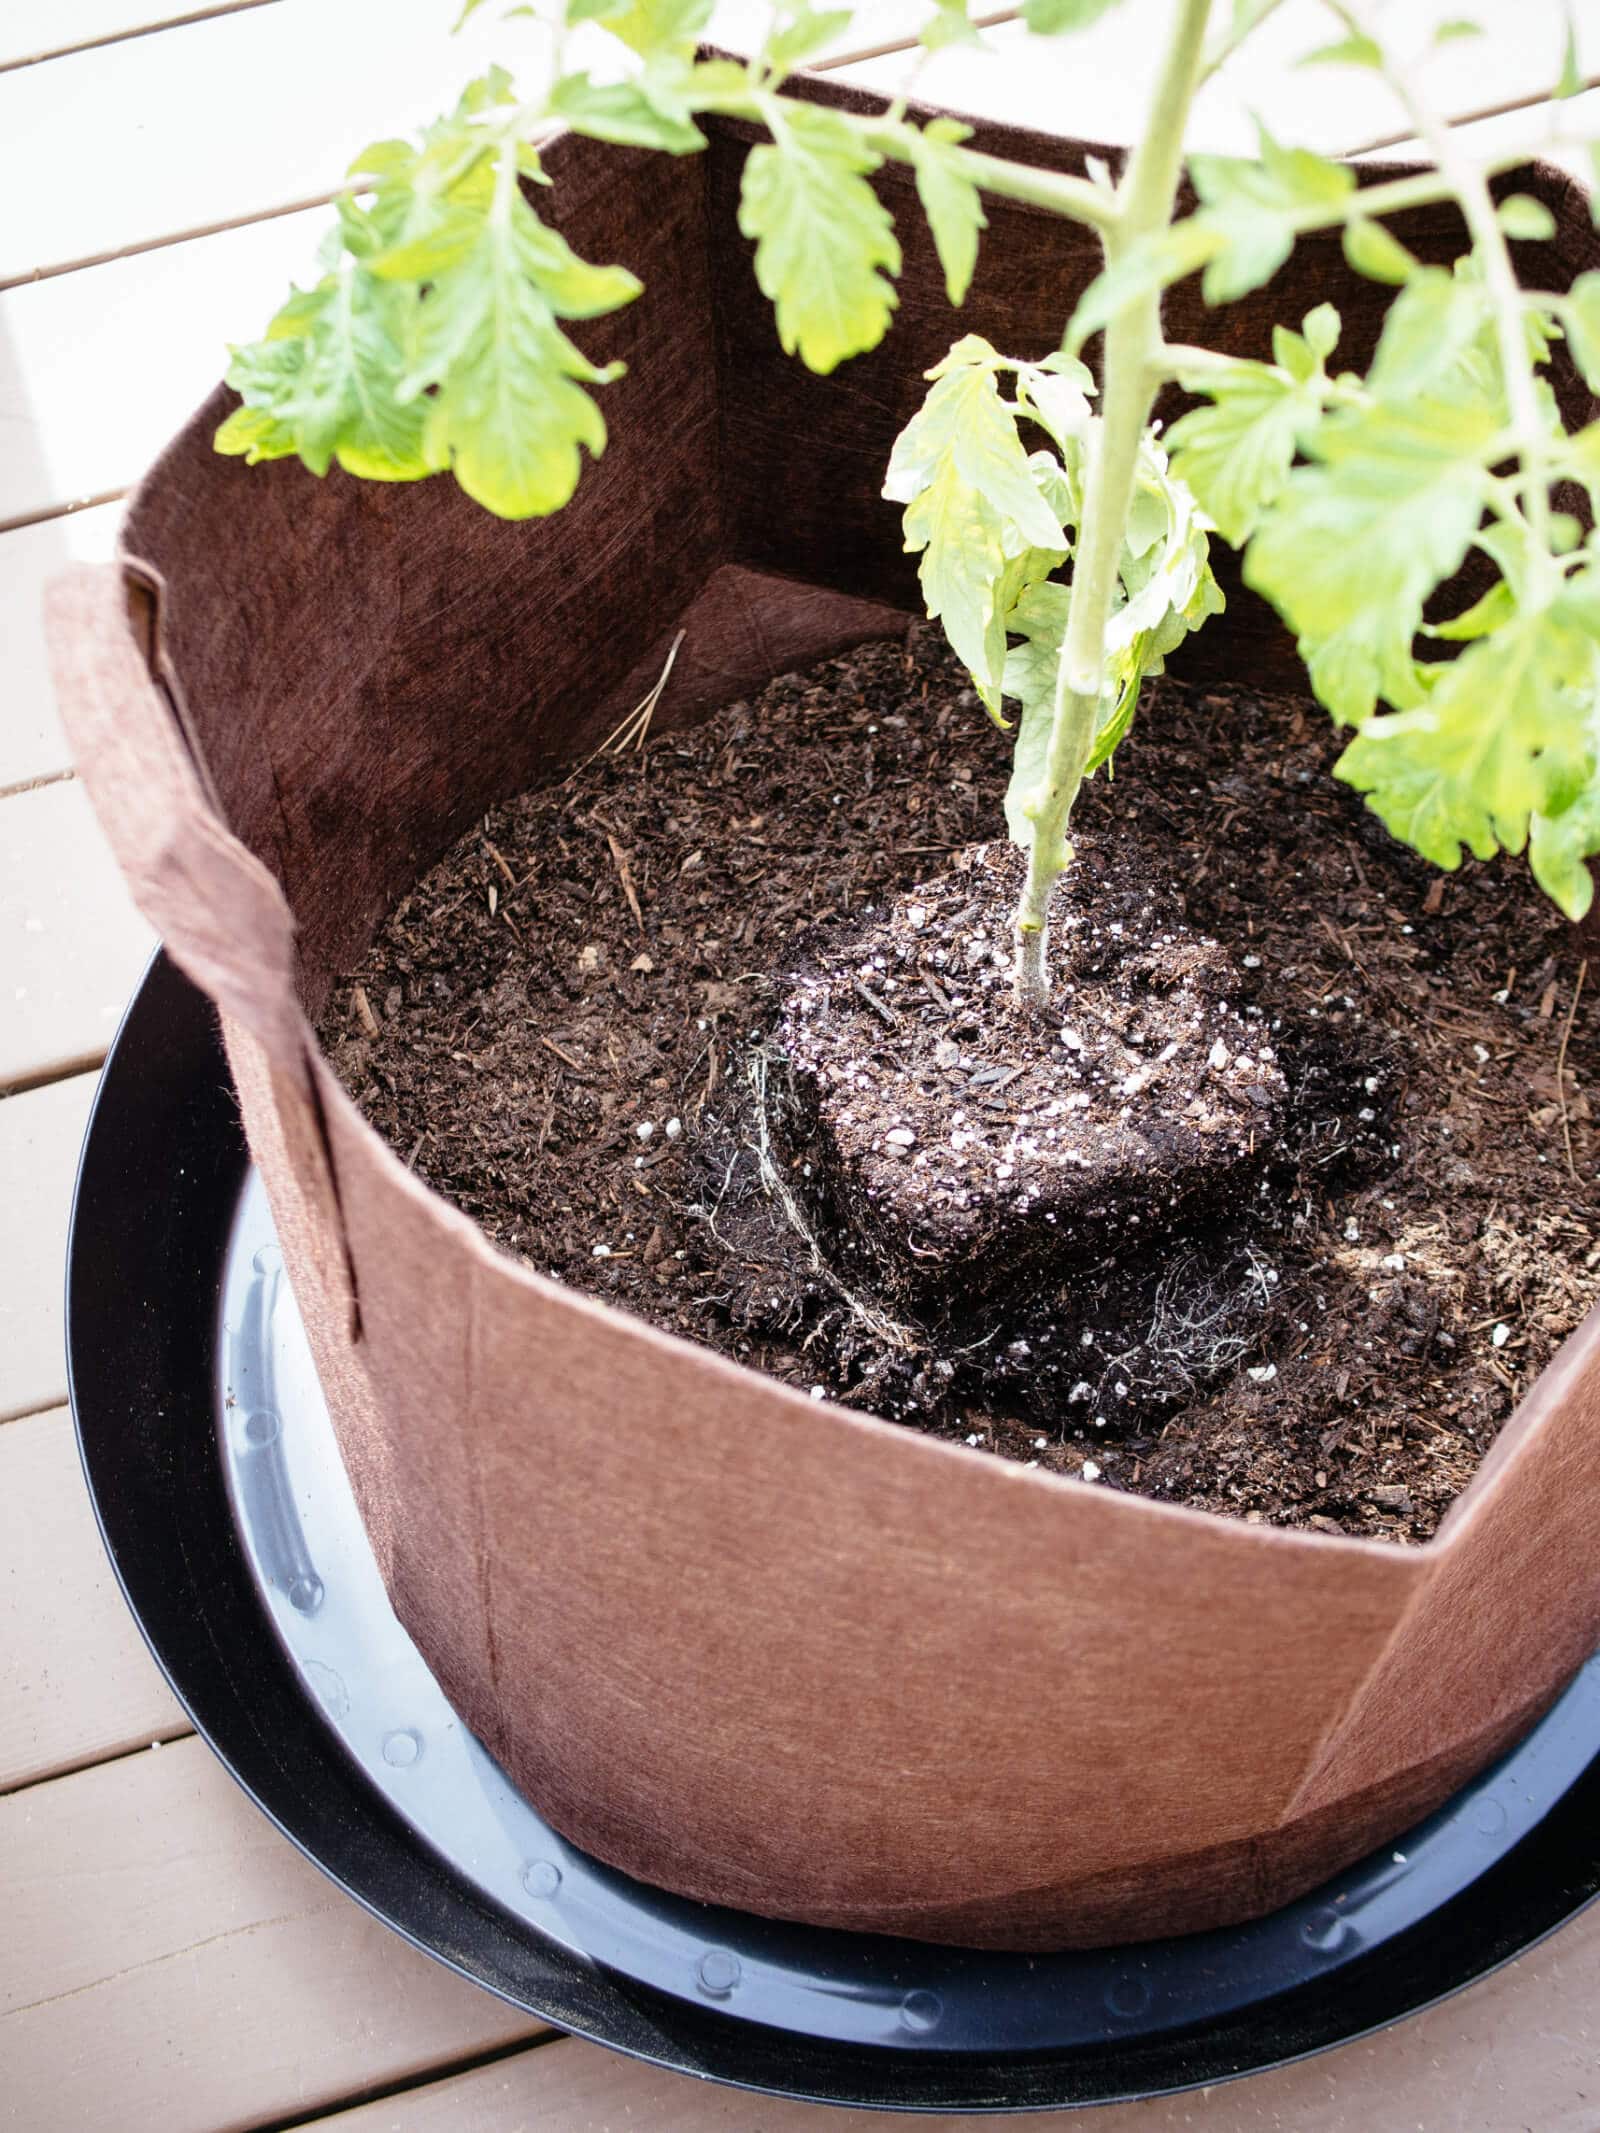 Plant tomatoes deeply in the soil for better root development